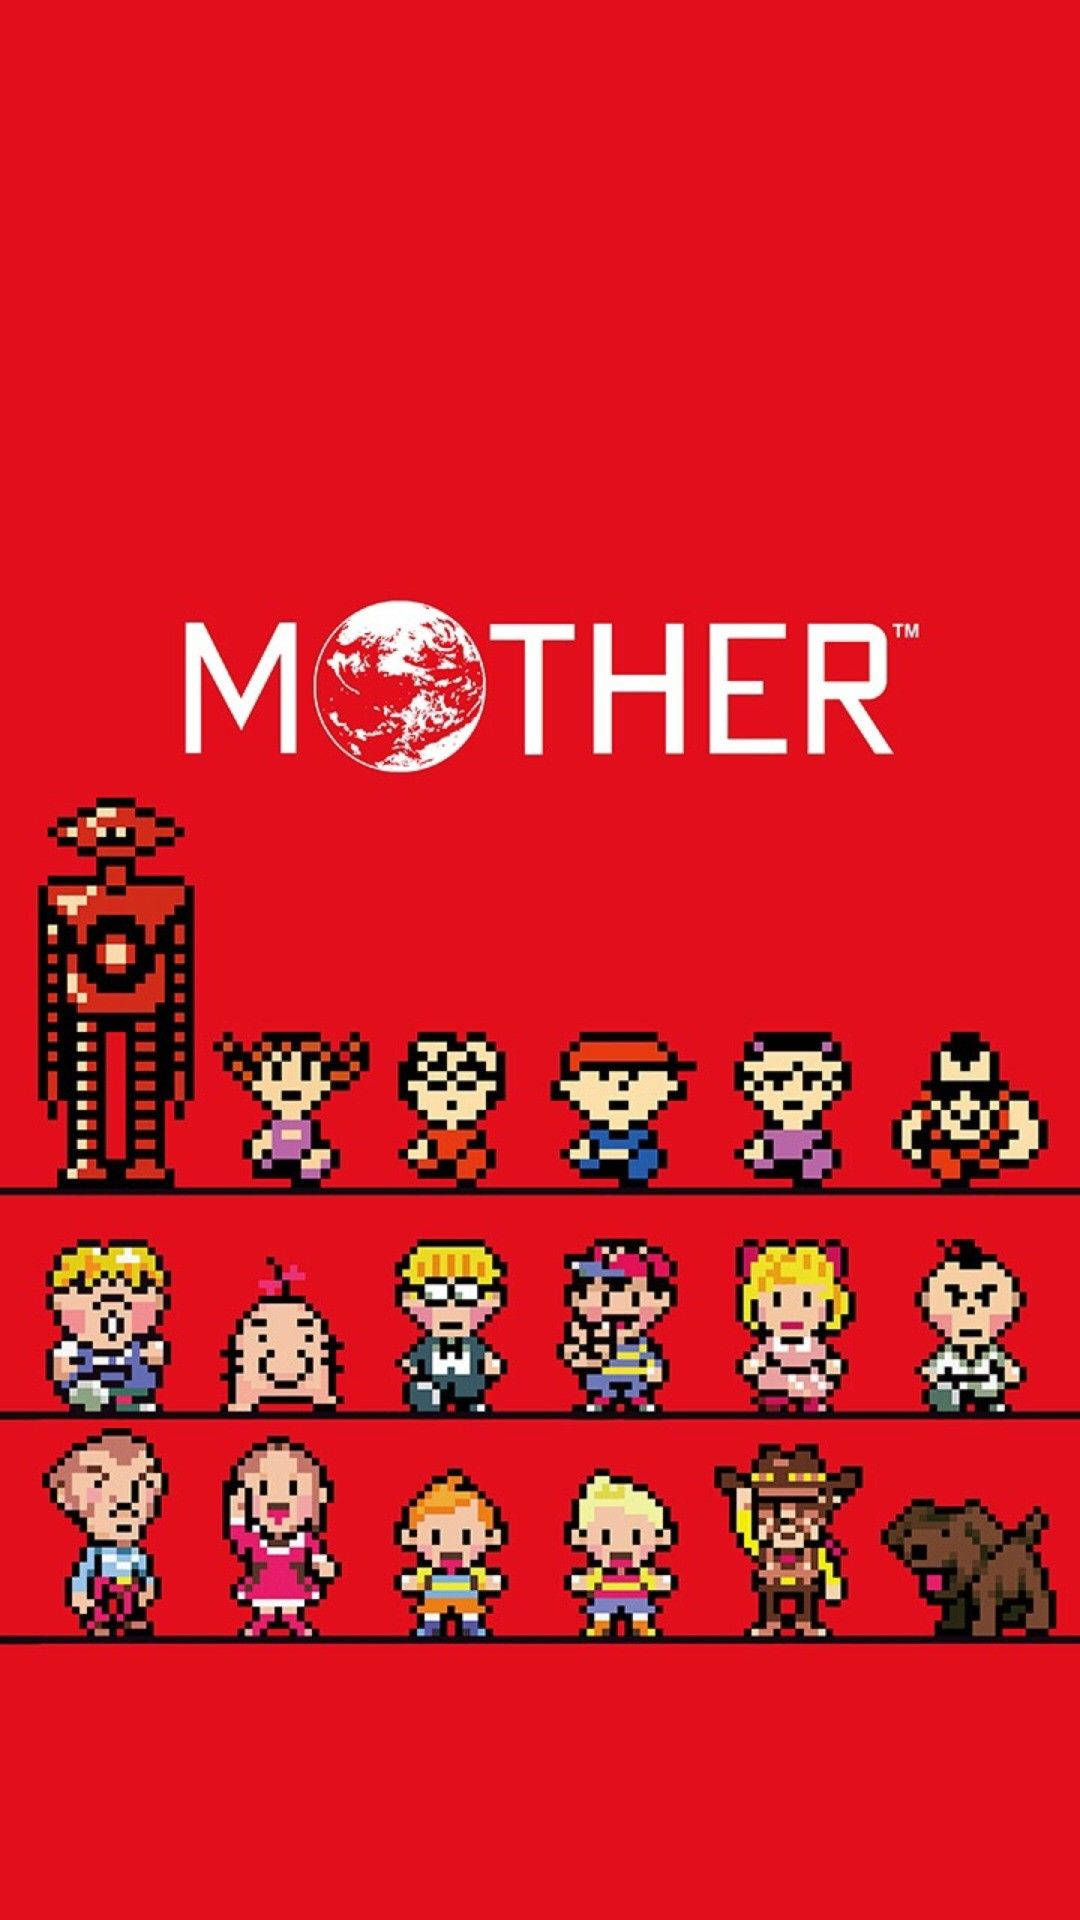 Related Keywords: Earthbound, Mother, Classic RPG, Nintendo, Video Games Wallpaper